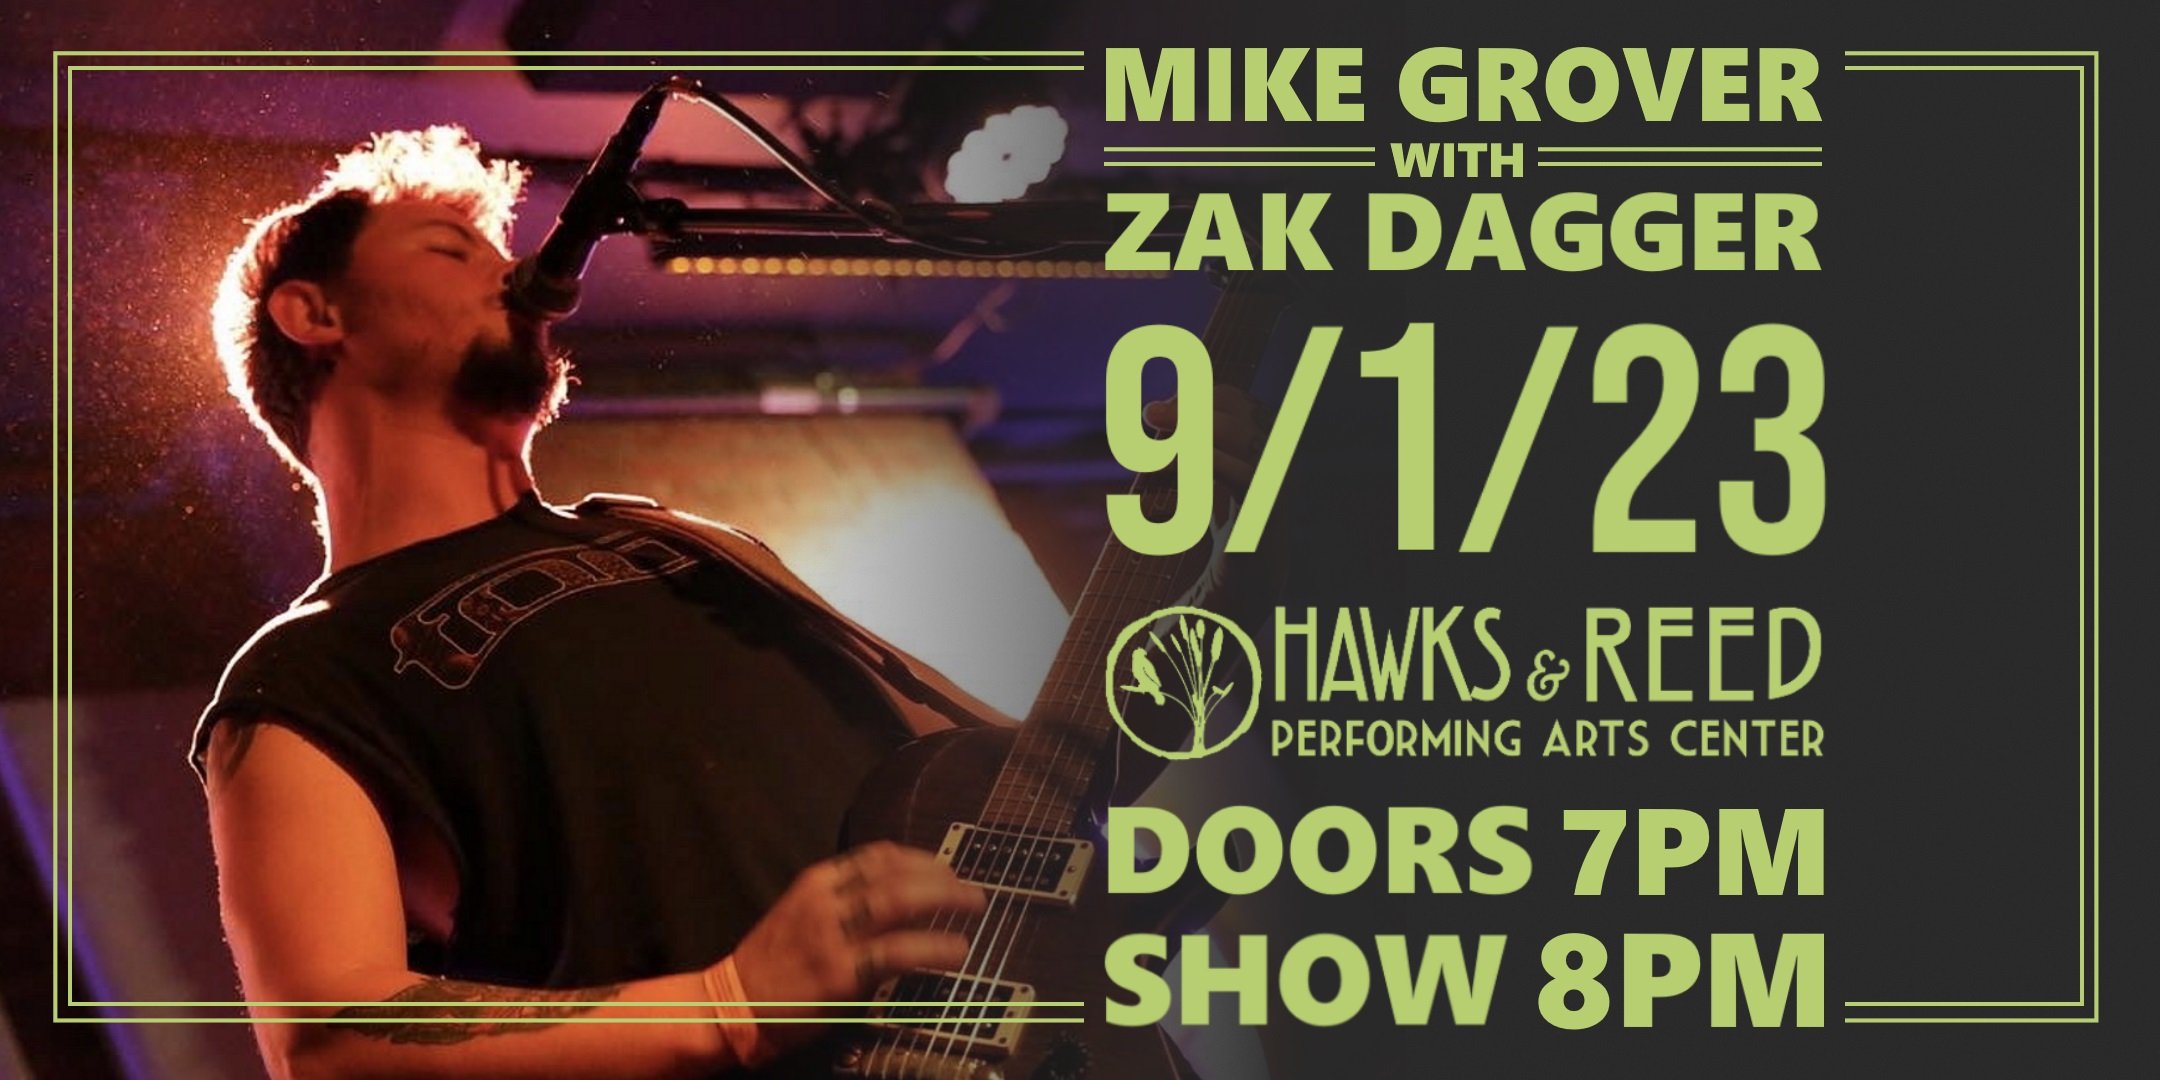 Mike Grover with Zak Dagger